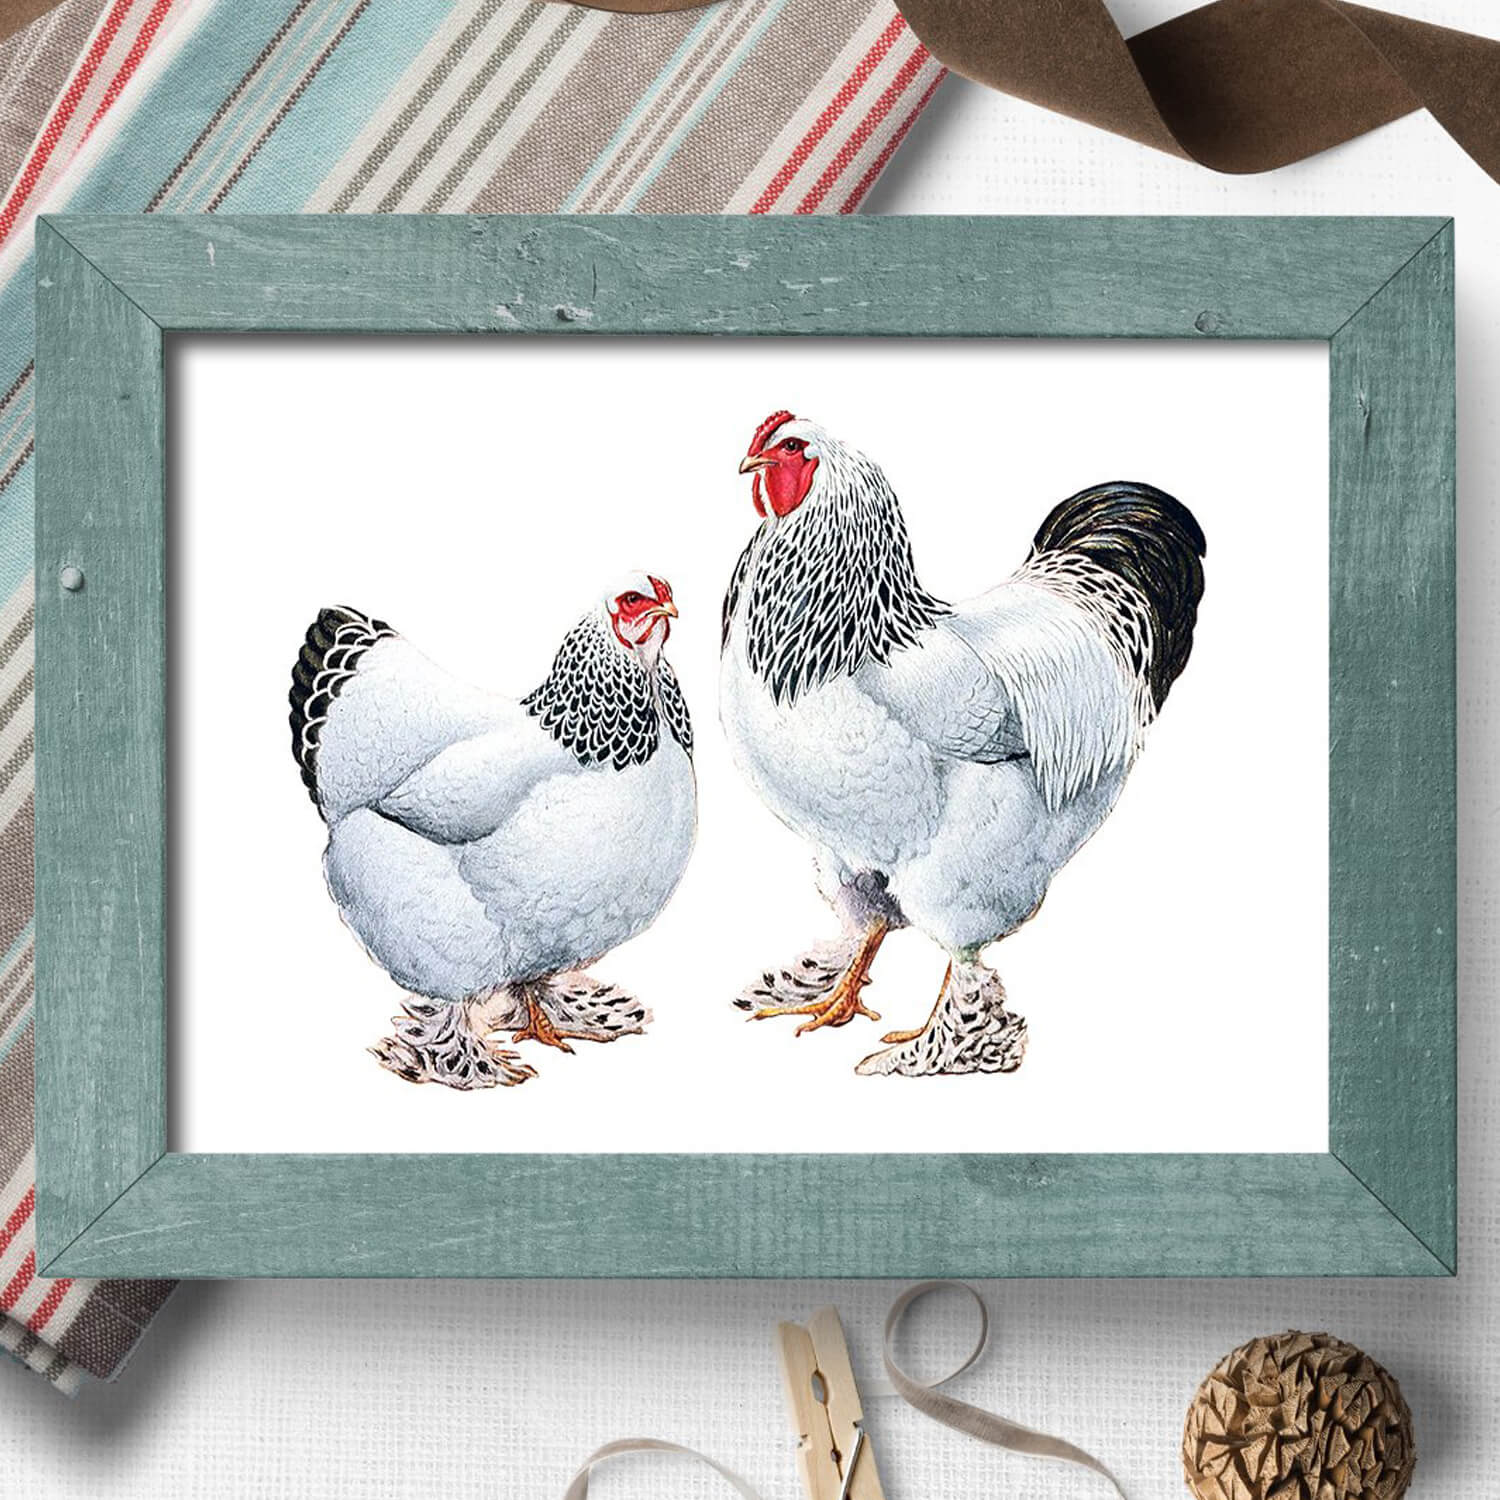 A chicken and a rooster on a picture with a white background and a wooden frame.